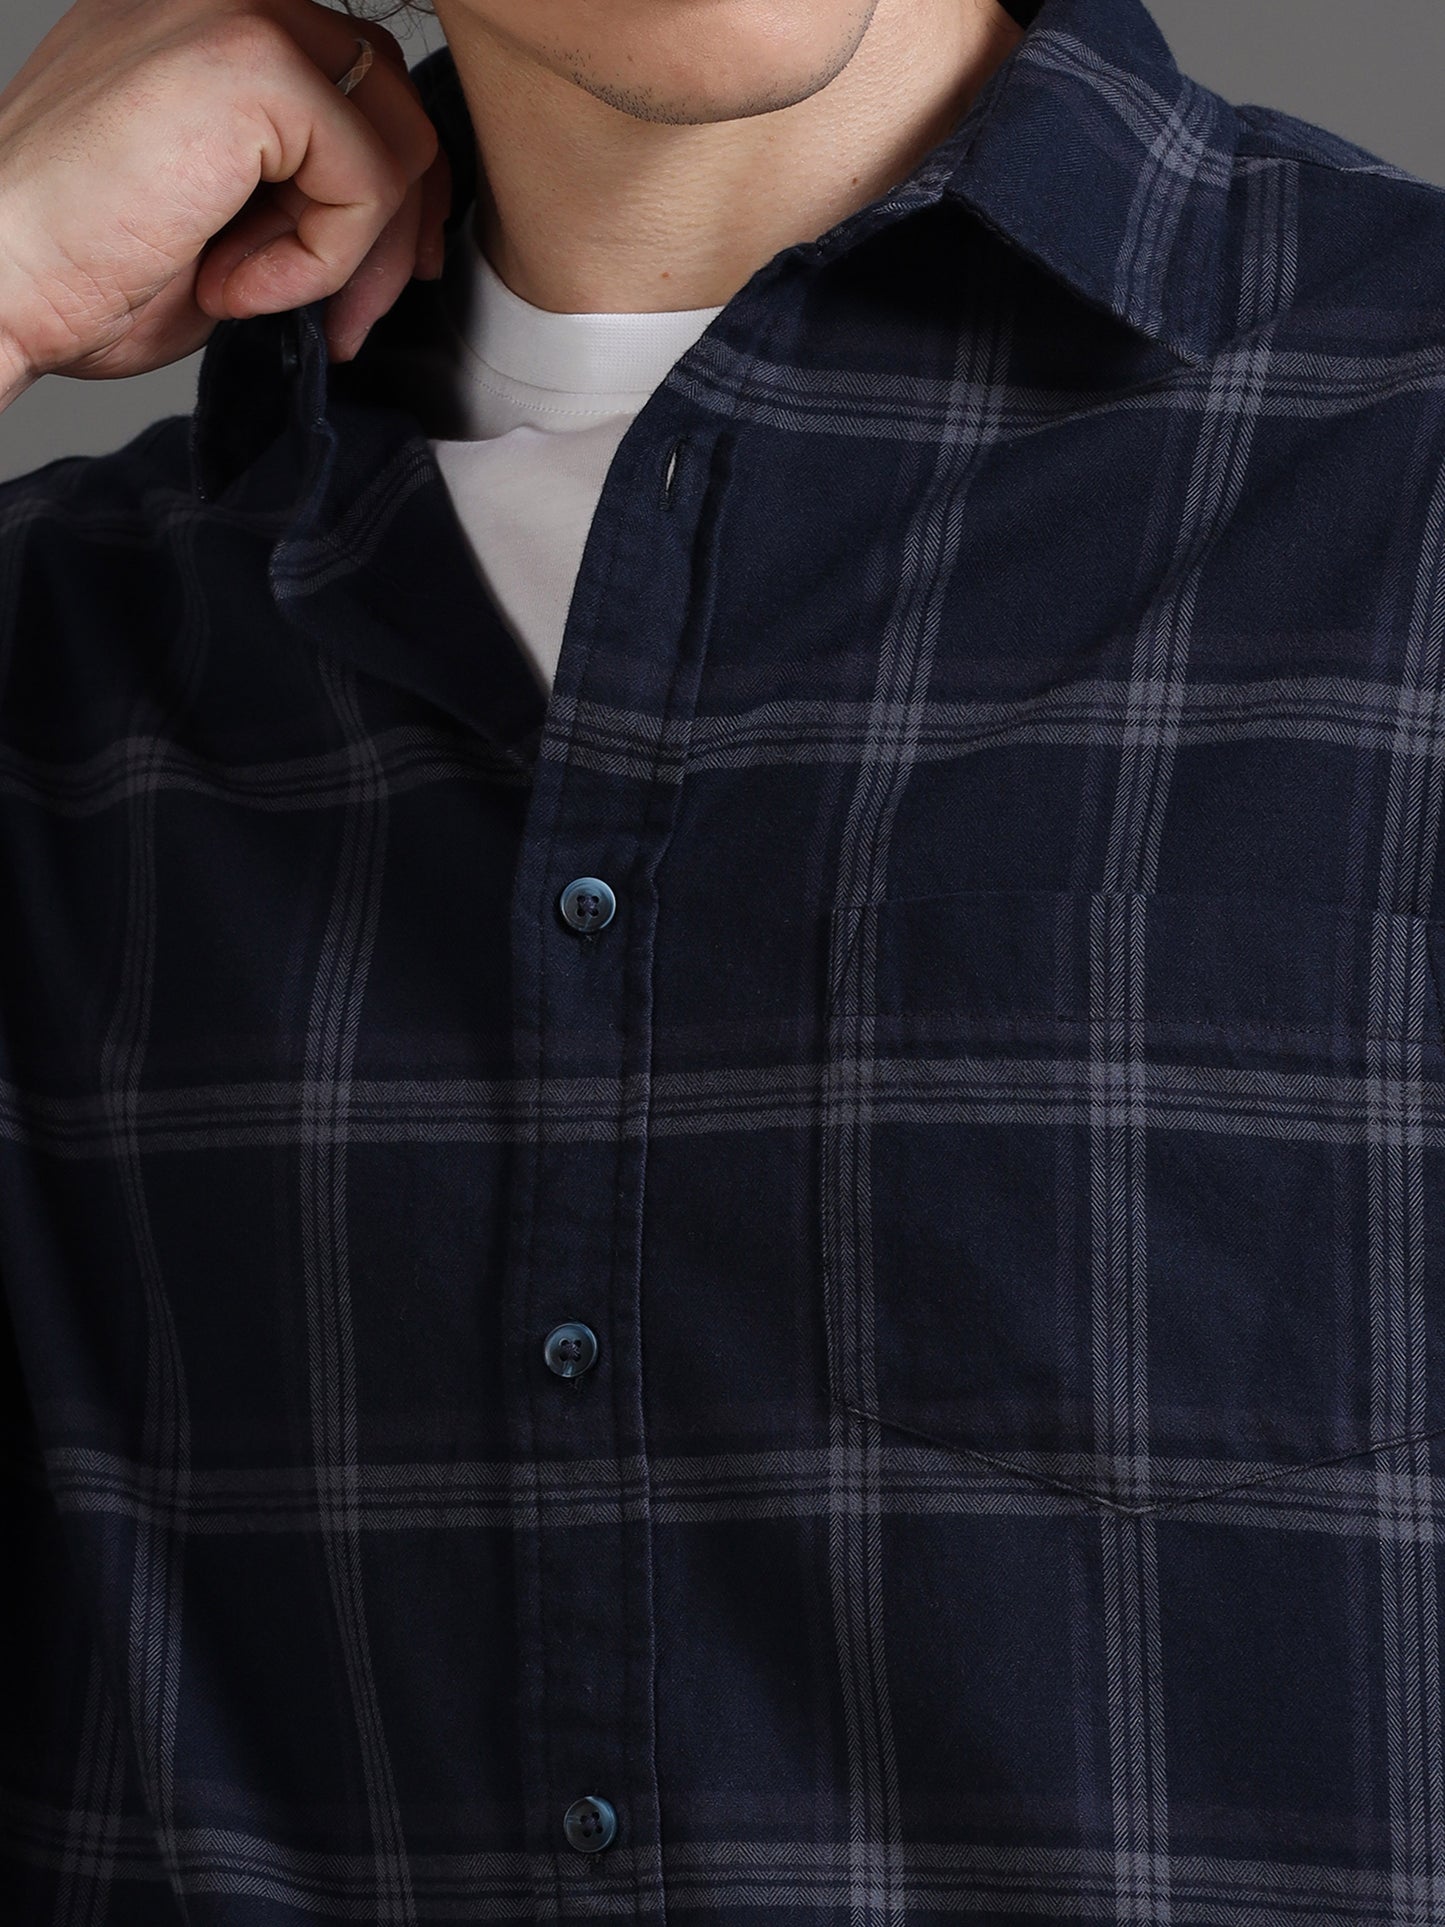 Premium Men Shirt, Relaxed Fit, Yarn Dyed Check, Pure Cotton, Full Sleeve, Navy Blue